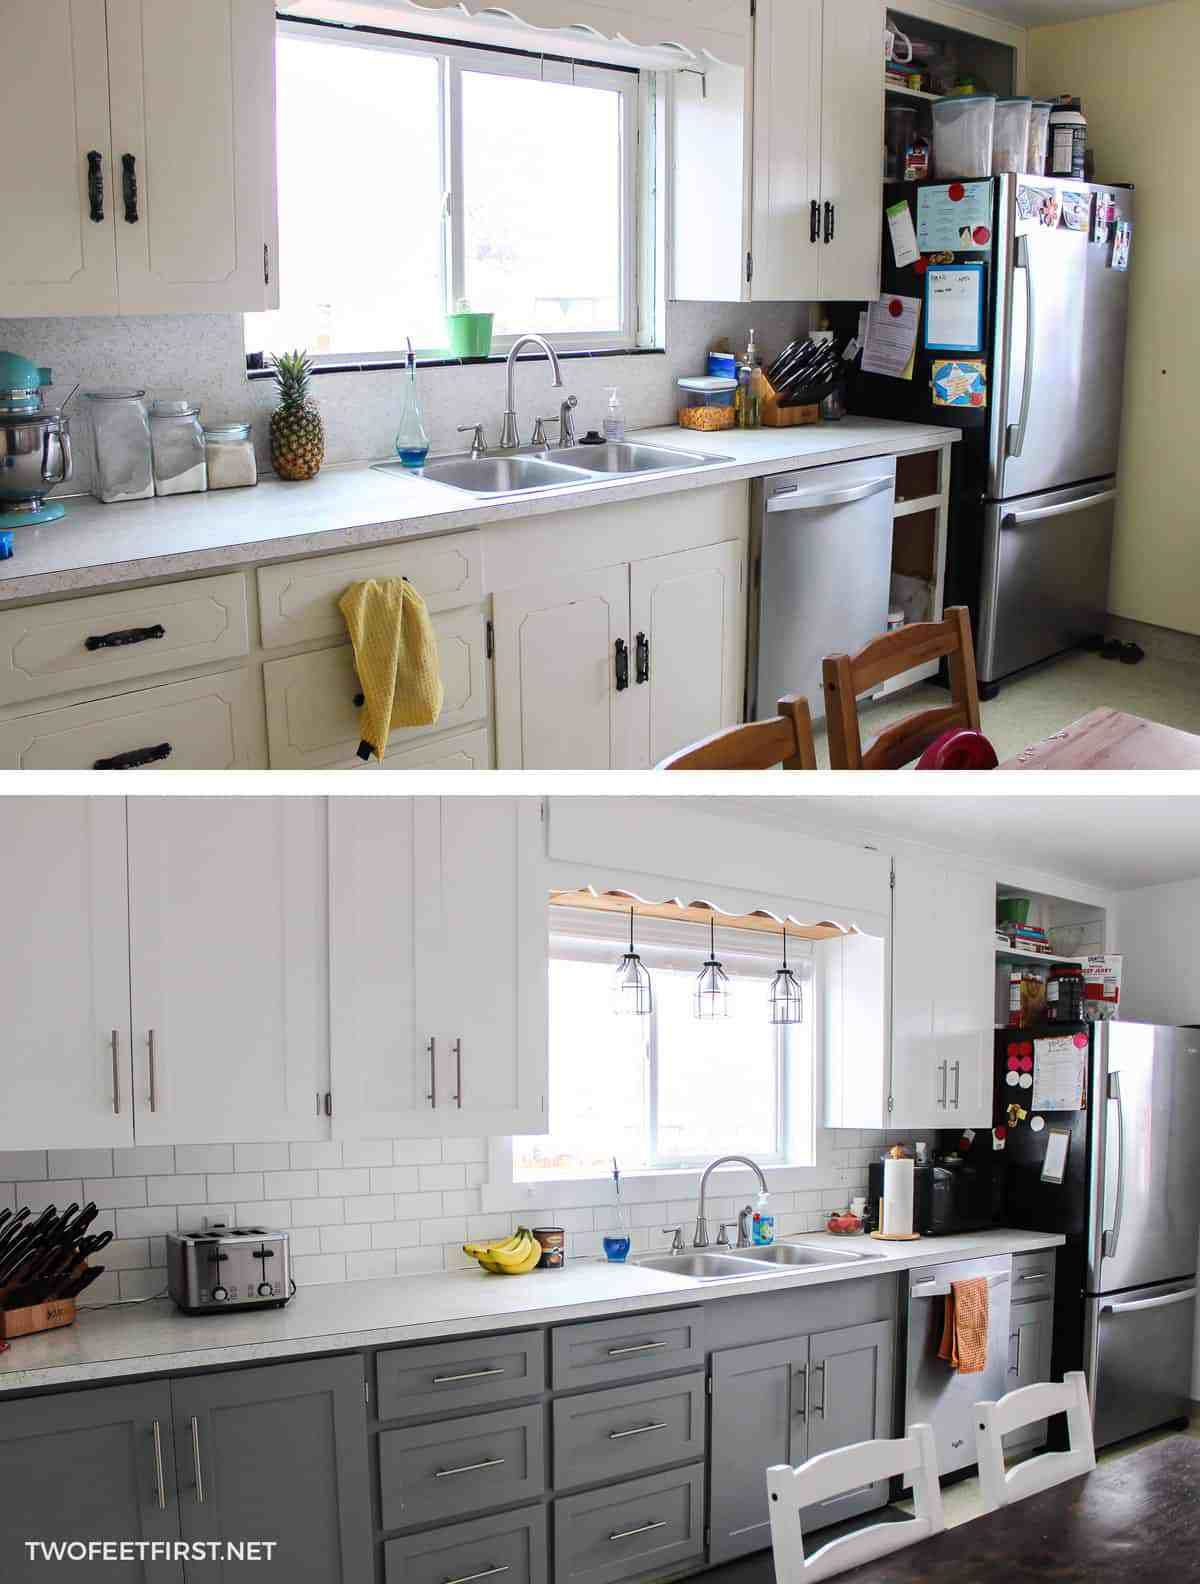 How to update kitchen cabinets without
replacing them